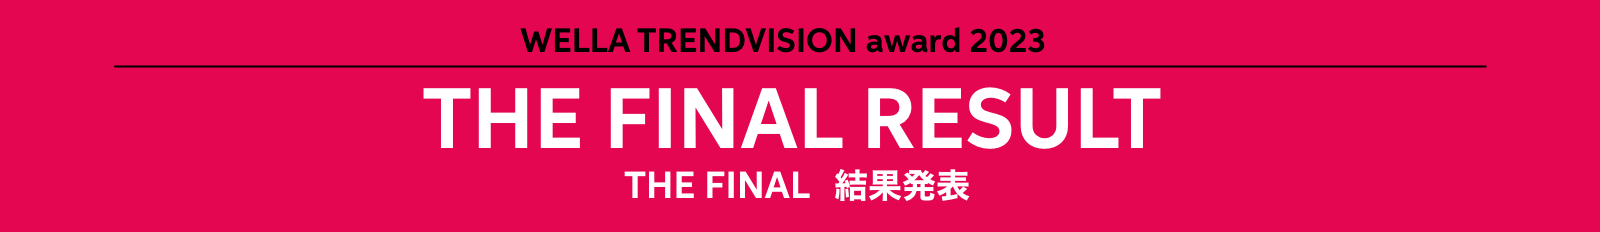 WELLA TRENDVISION award 2023 THE FINAL RESULT THE FINAL 結果発表